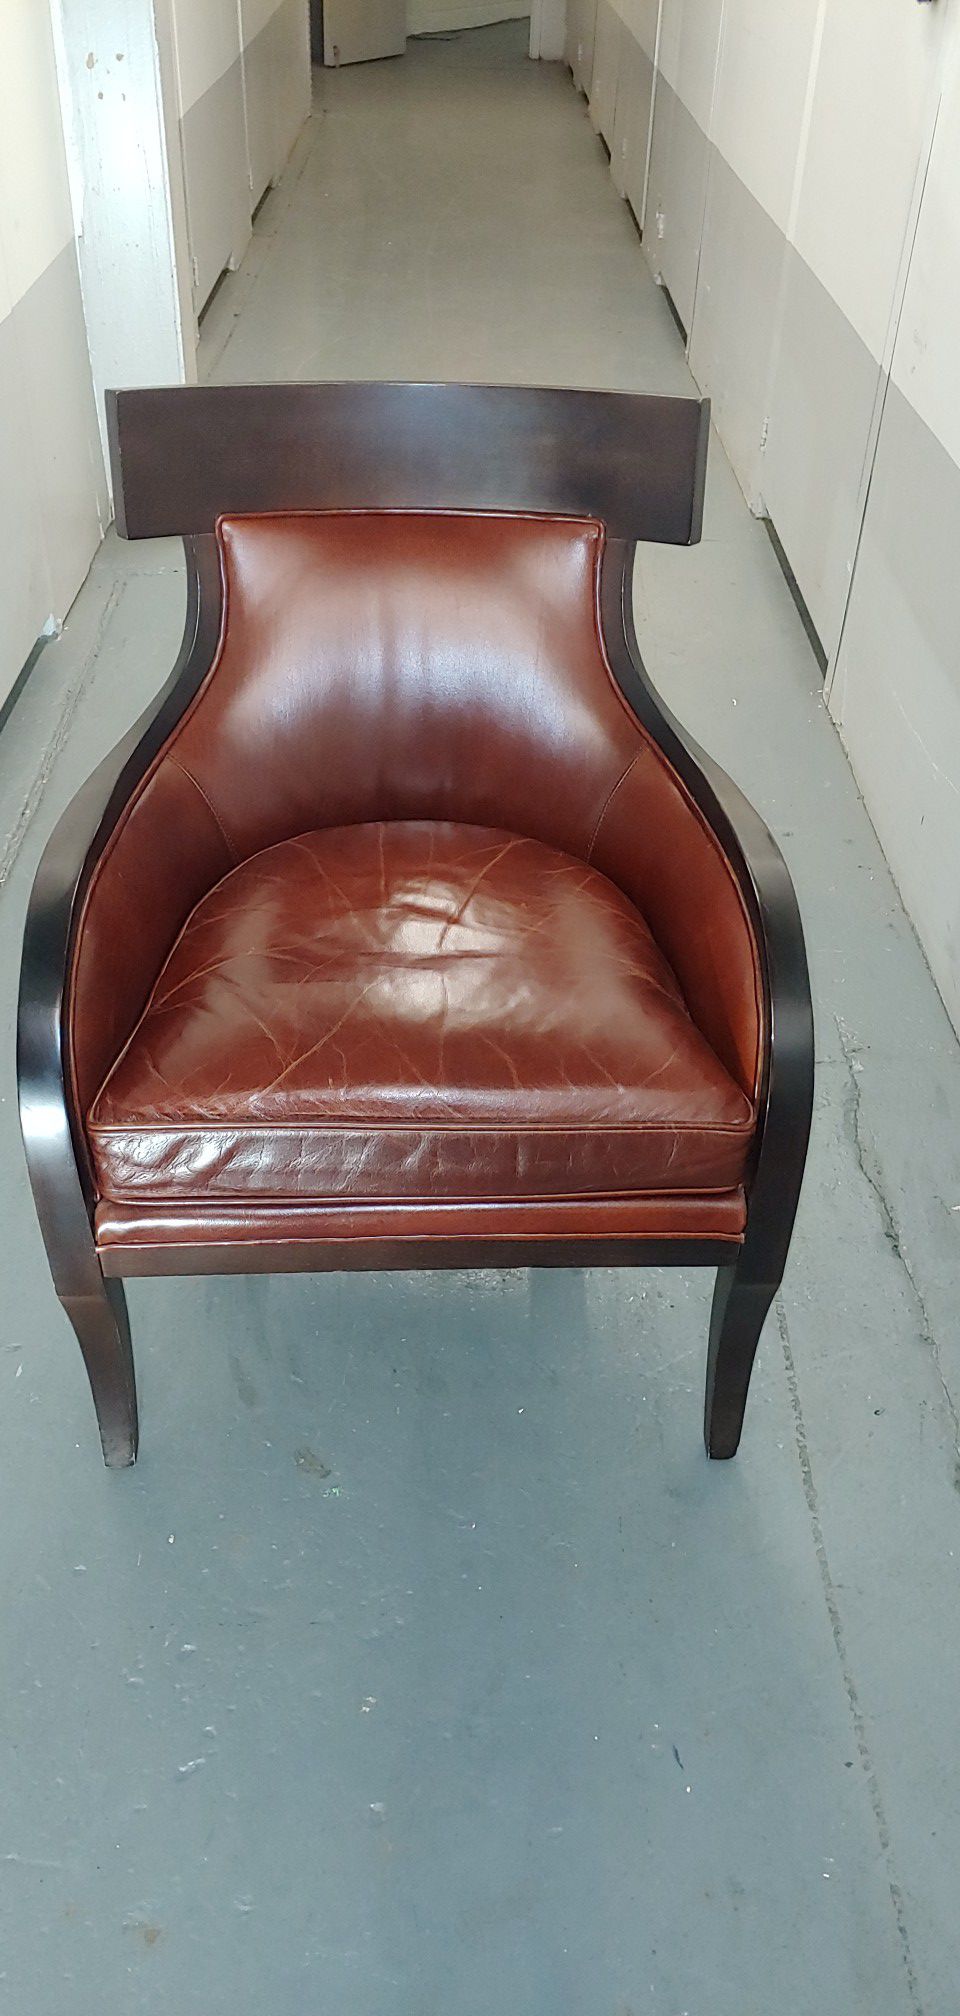 Crate & Barrel wood and leather guest chair Style 0534 -CALB $75 obo